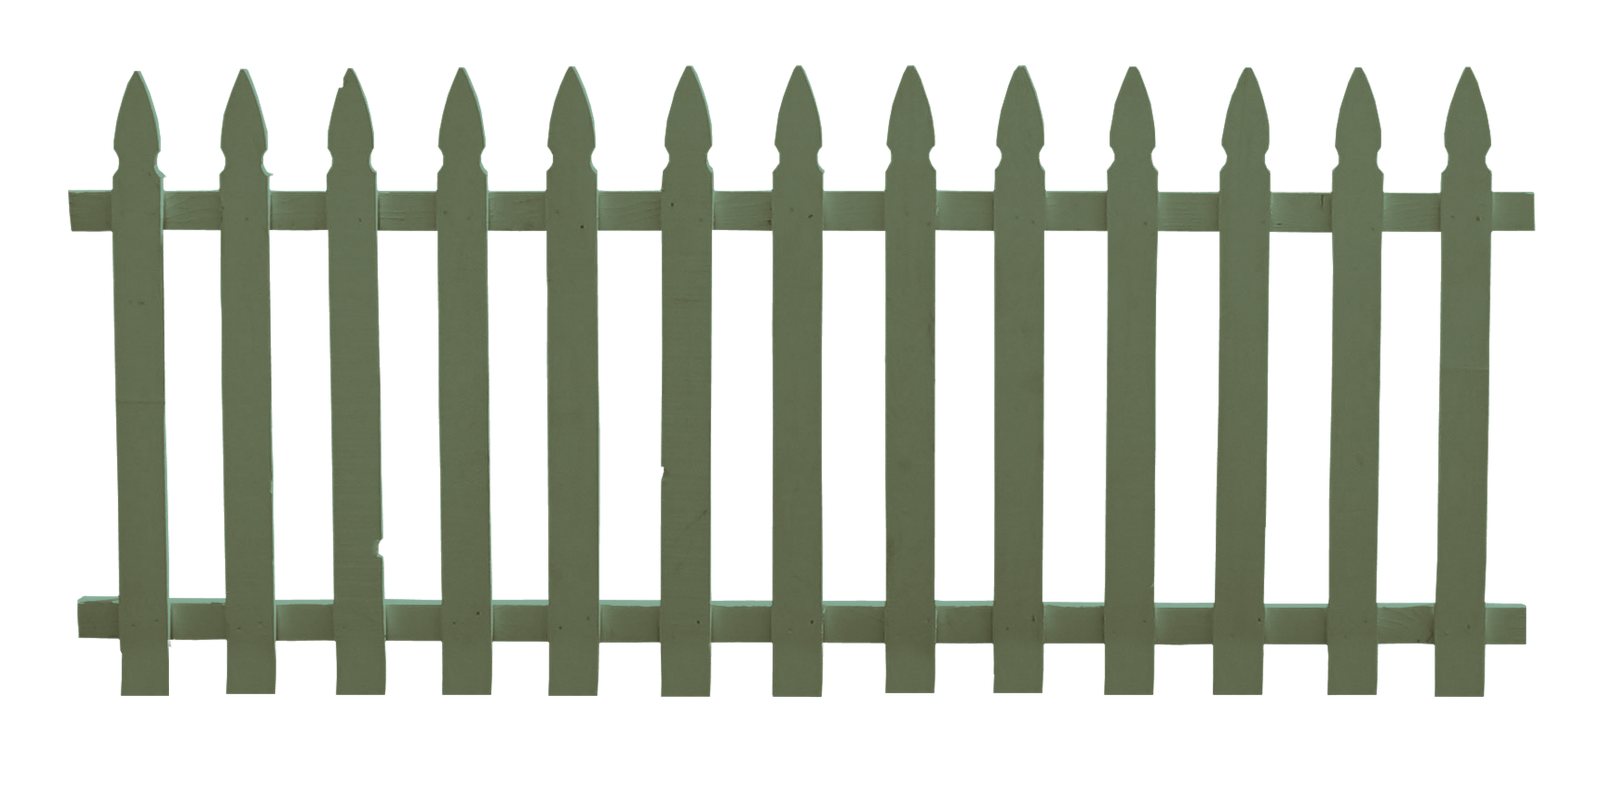 Printable Picket Fence Clip Art - ClipArt Best